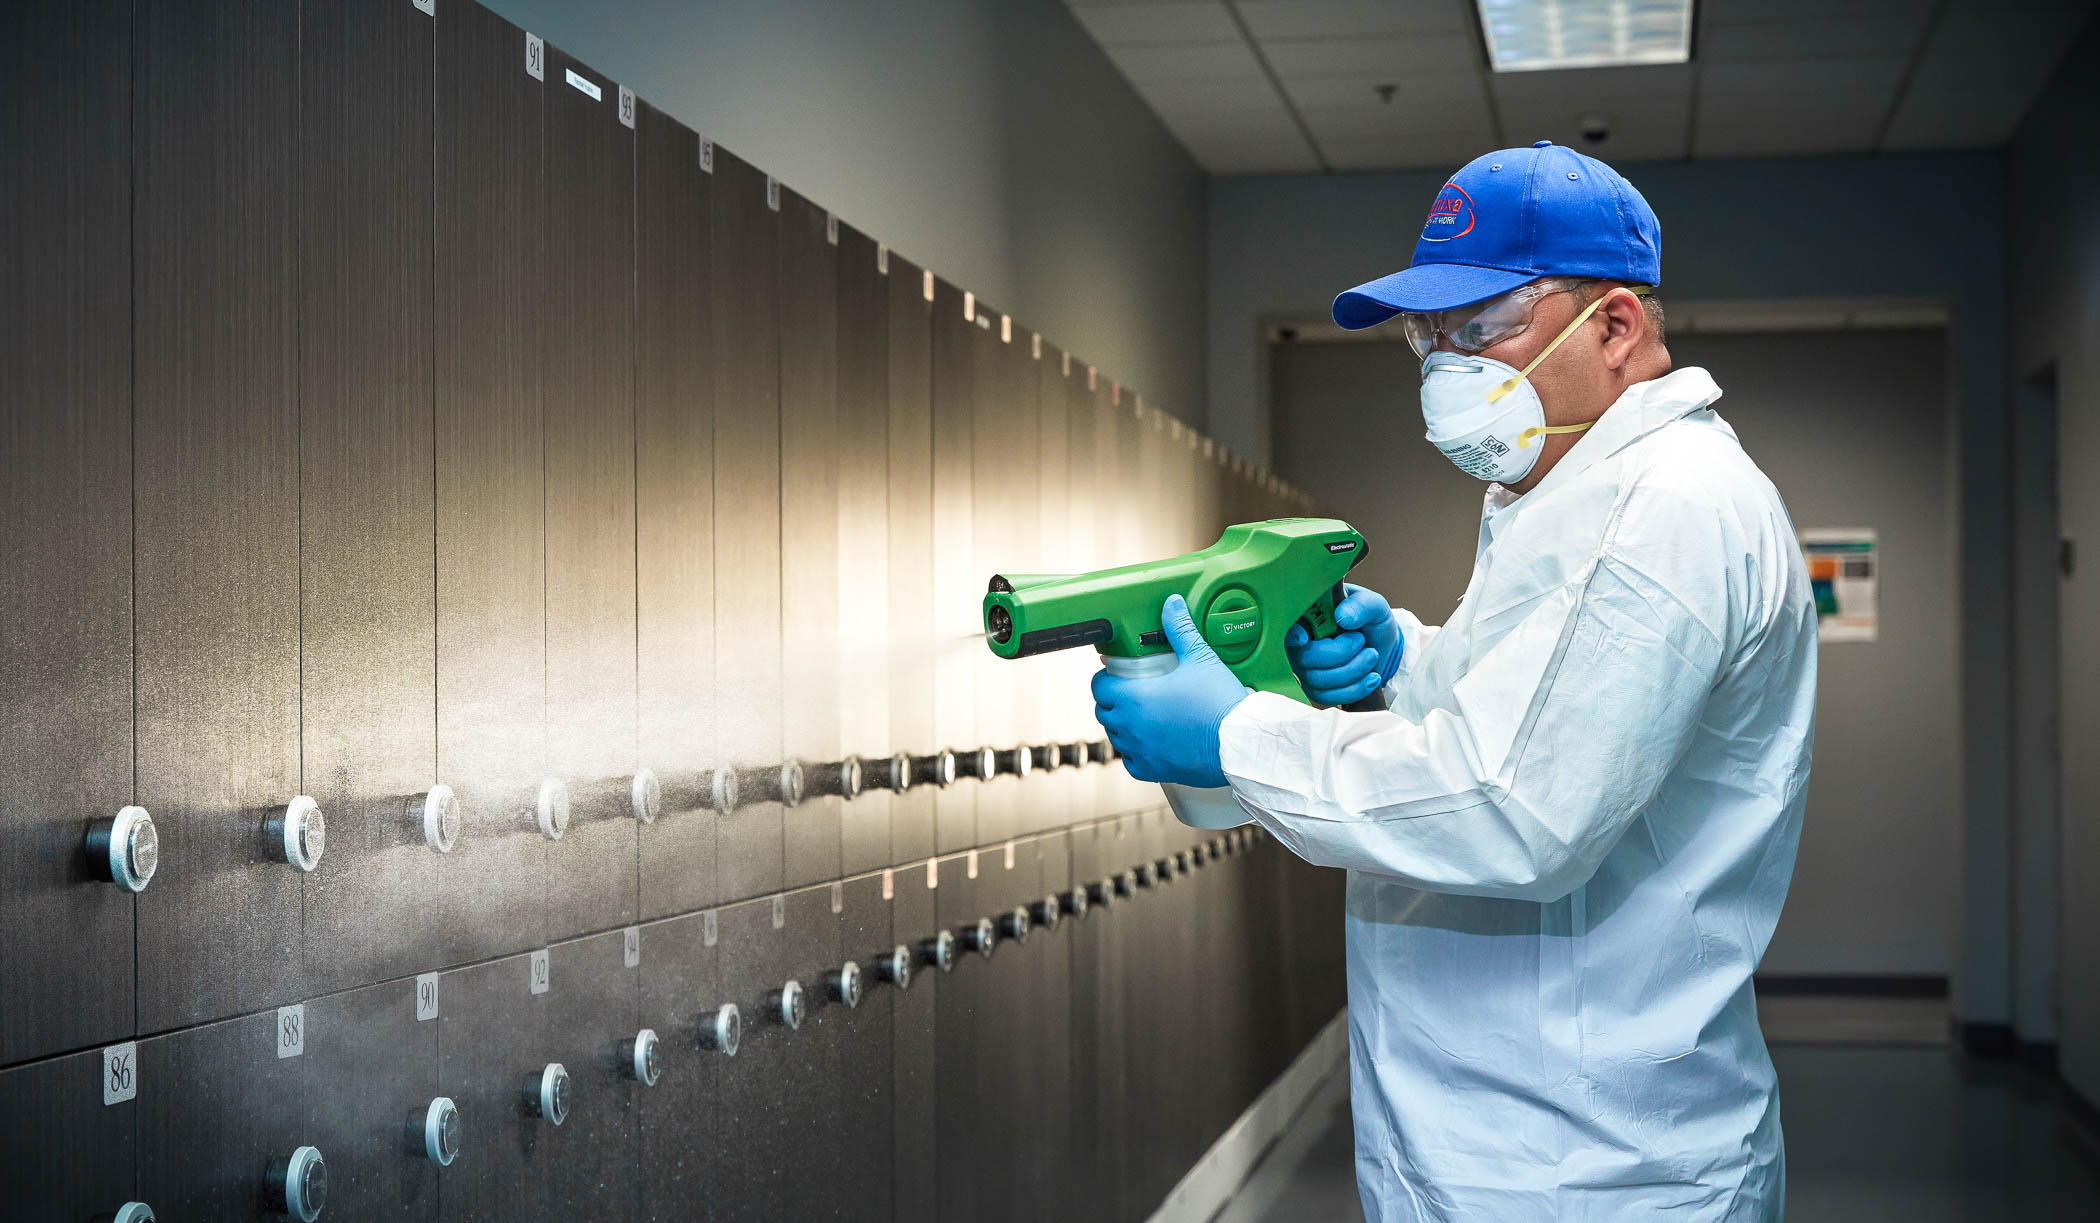 Man Disinfects Atlanta Office While Photographed